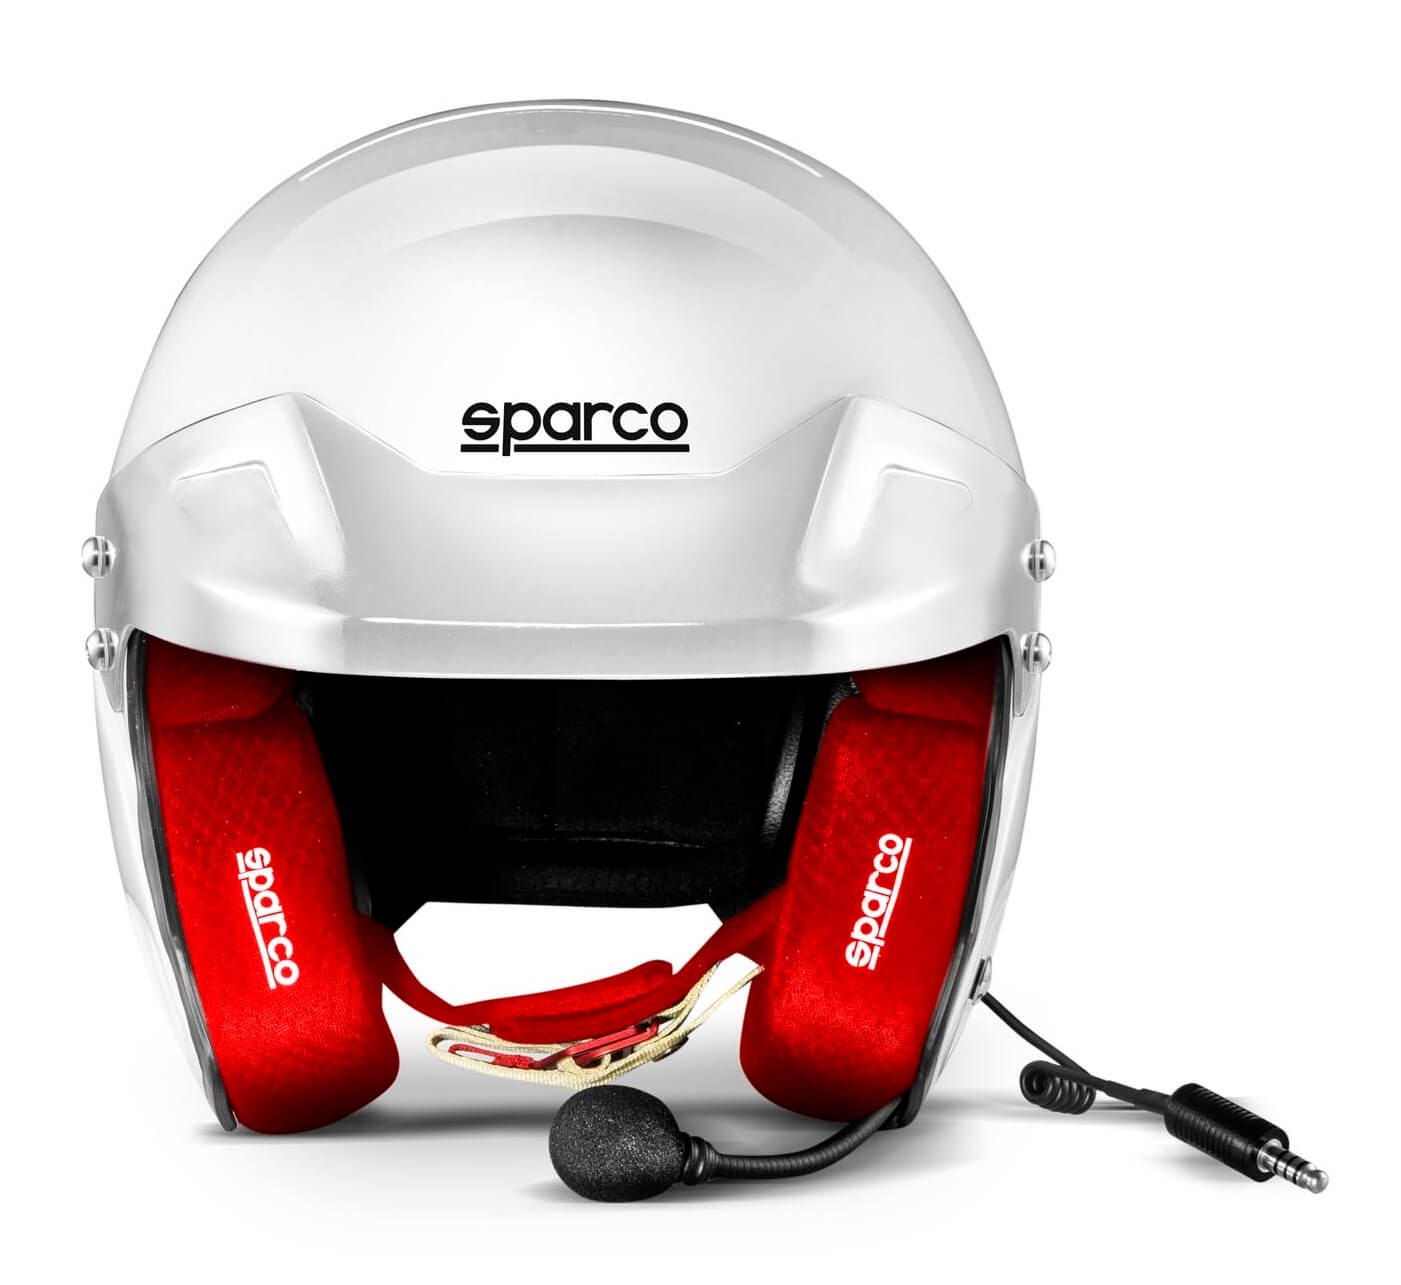 SPARCO 003369BIRS3ML RJ-i Racing helmet open-face, FIA/SNELL SA2020, white/red, size M+ (59) Photo-1 